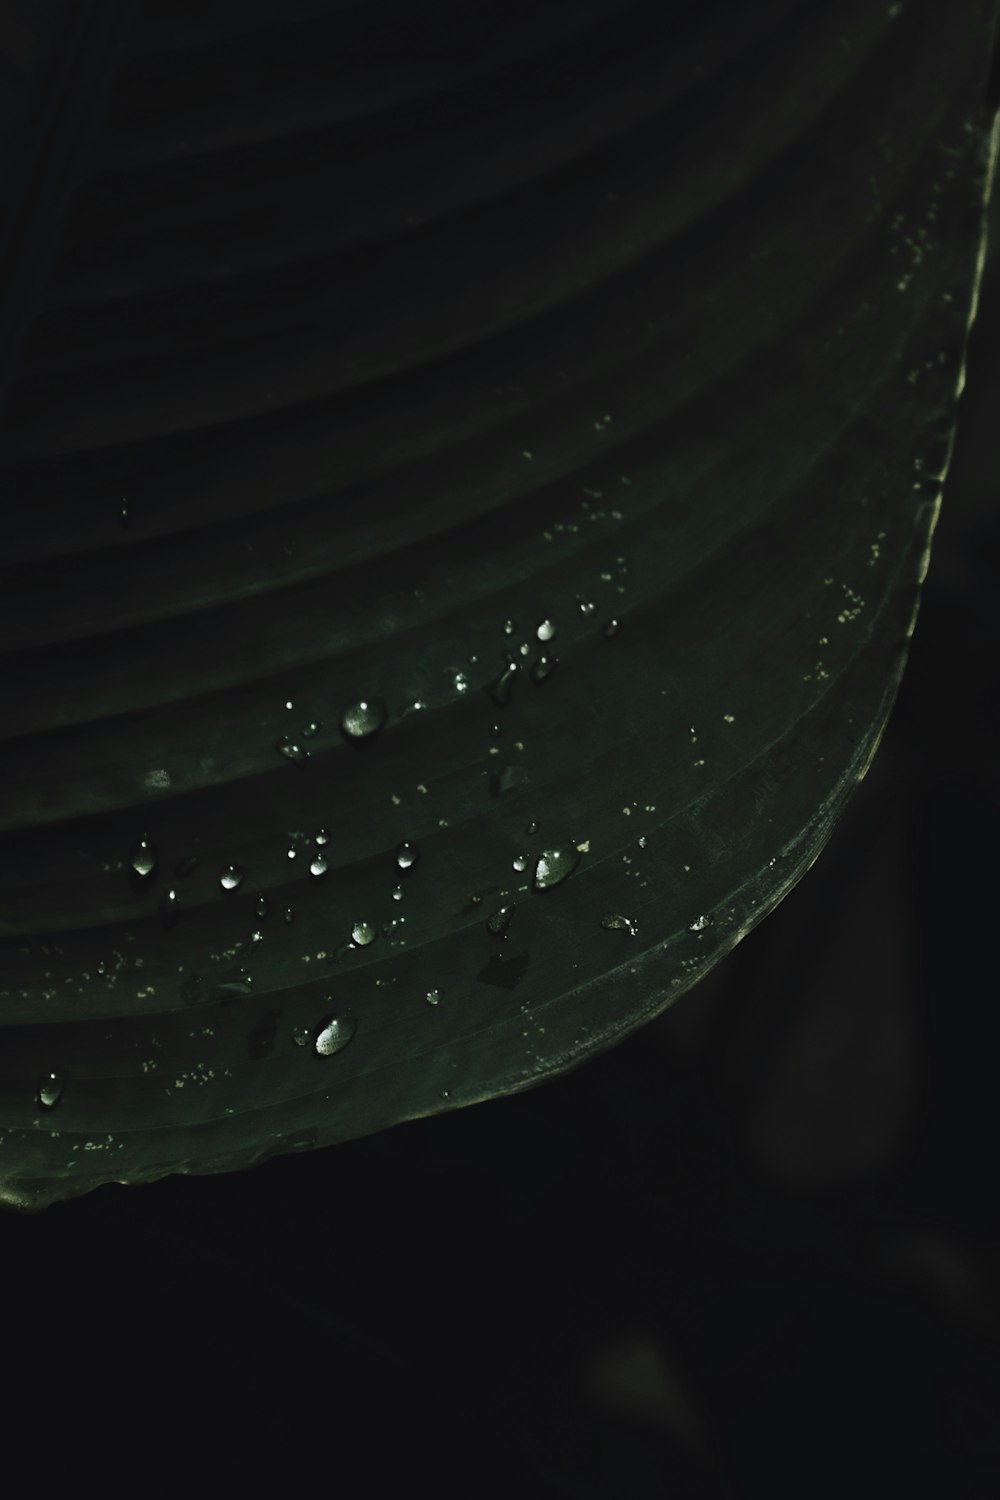 water droplets on black textile